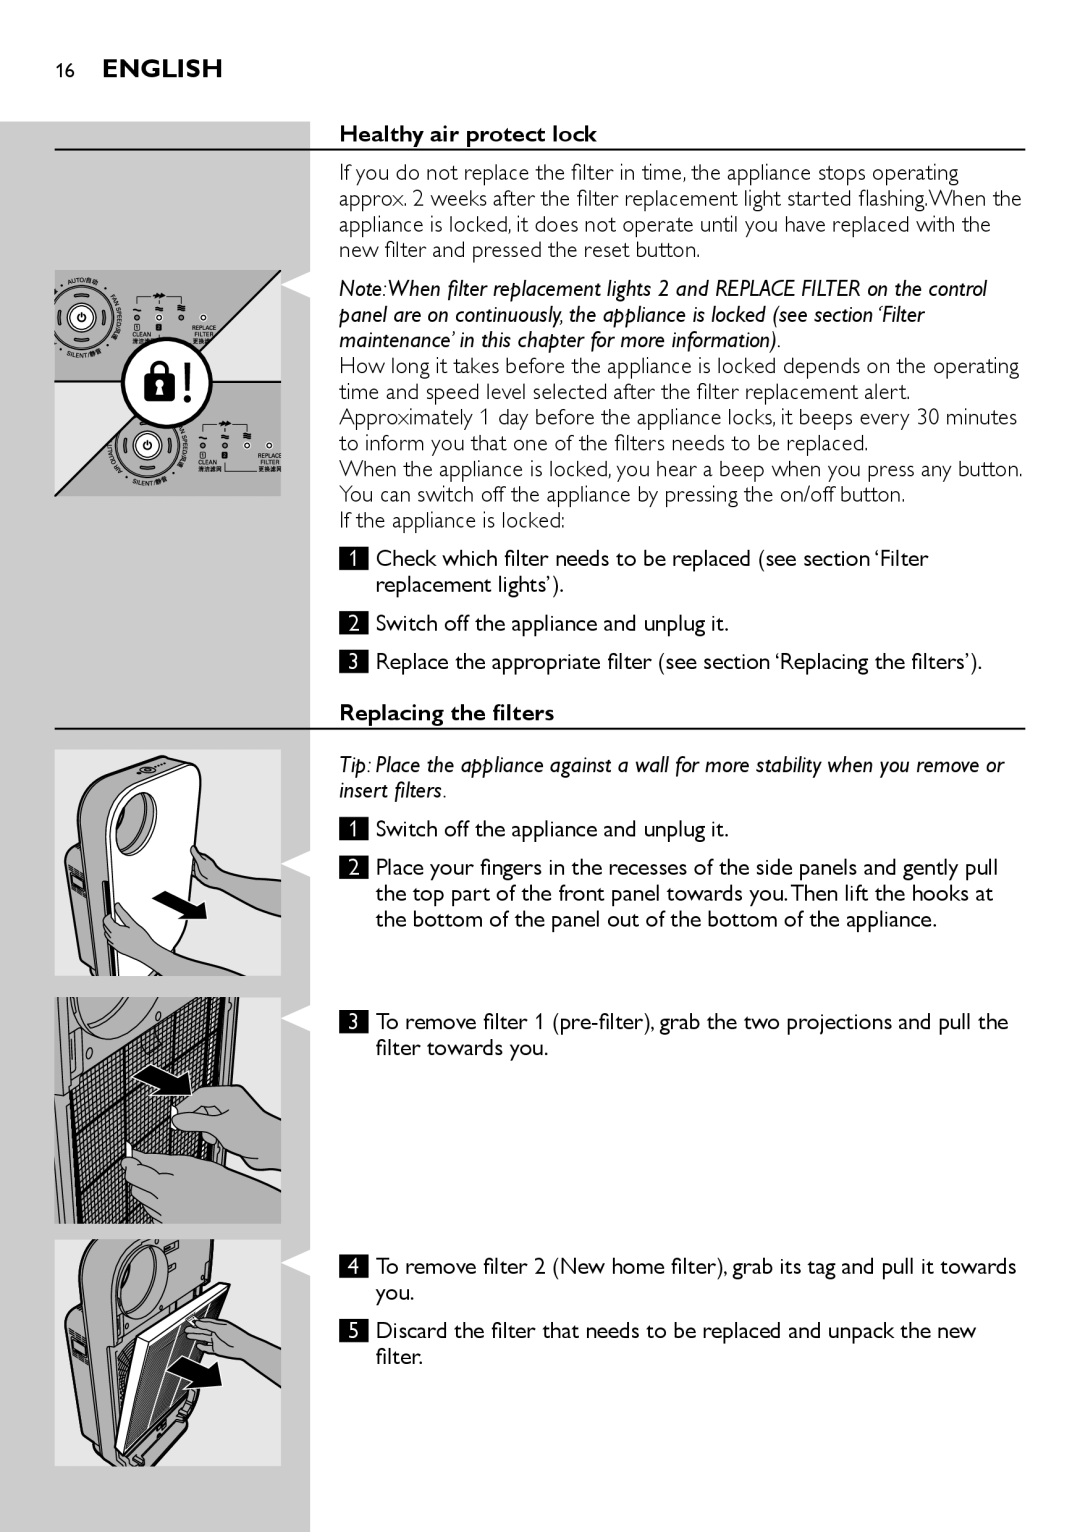 Philips AC4076 user manual 16English, Healthy air protect lock, Replacing the filters 